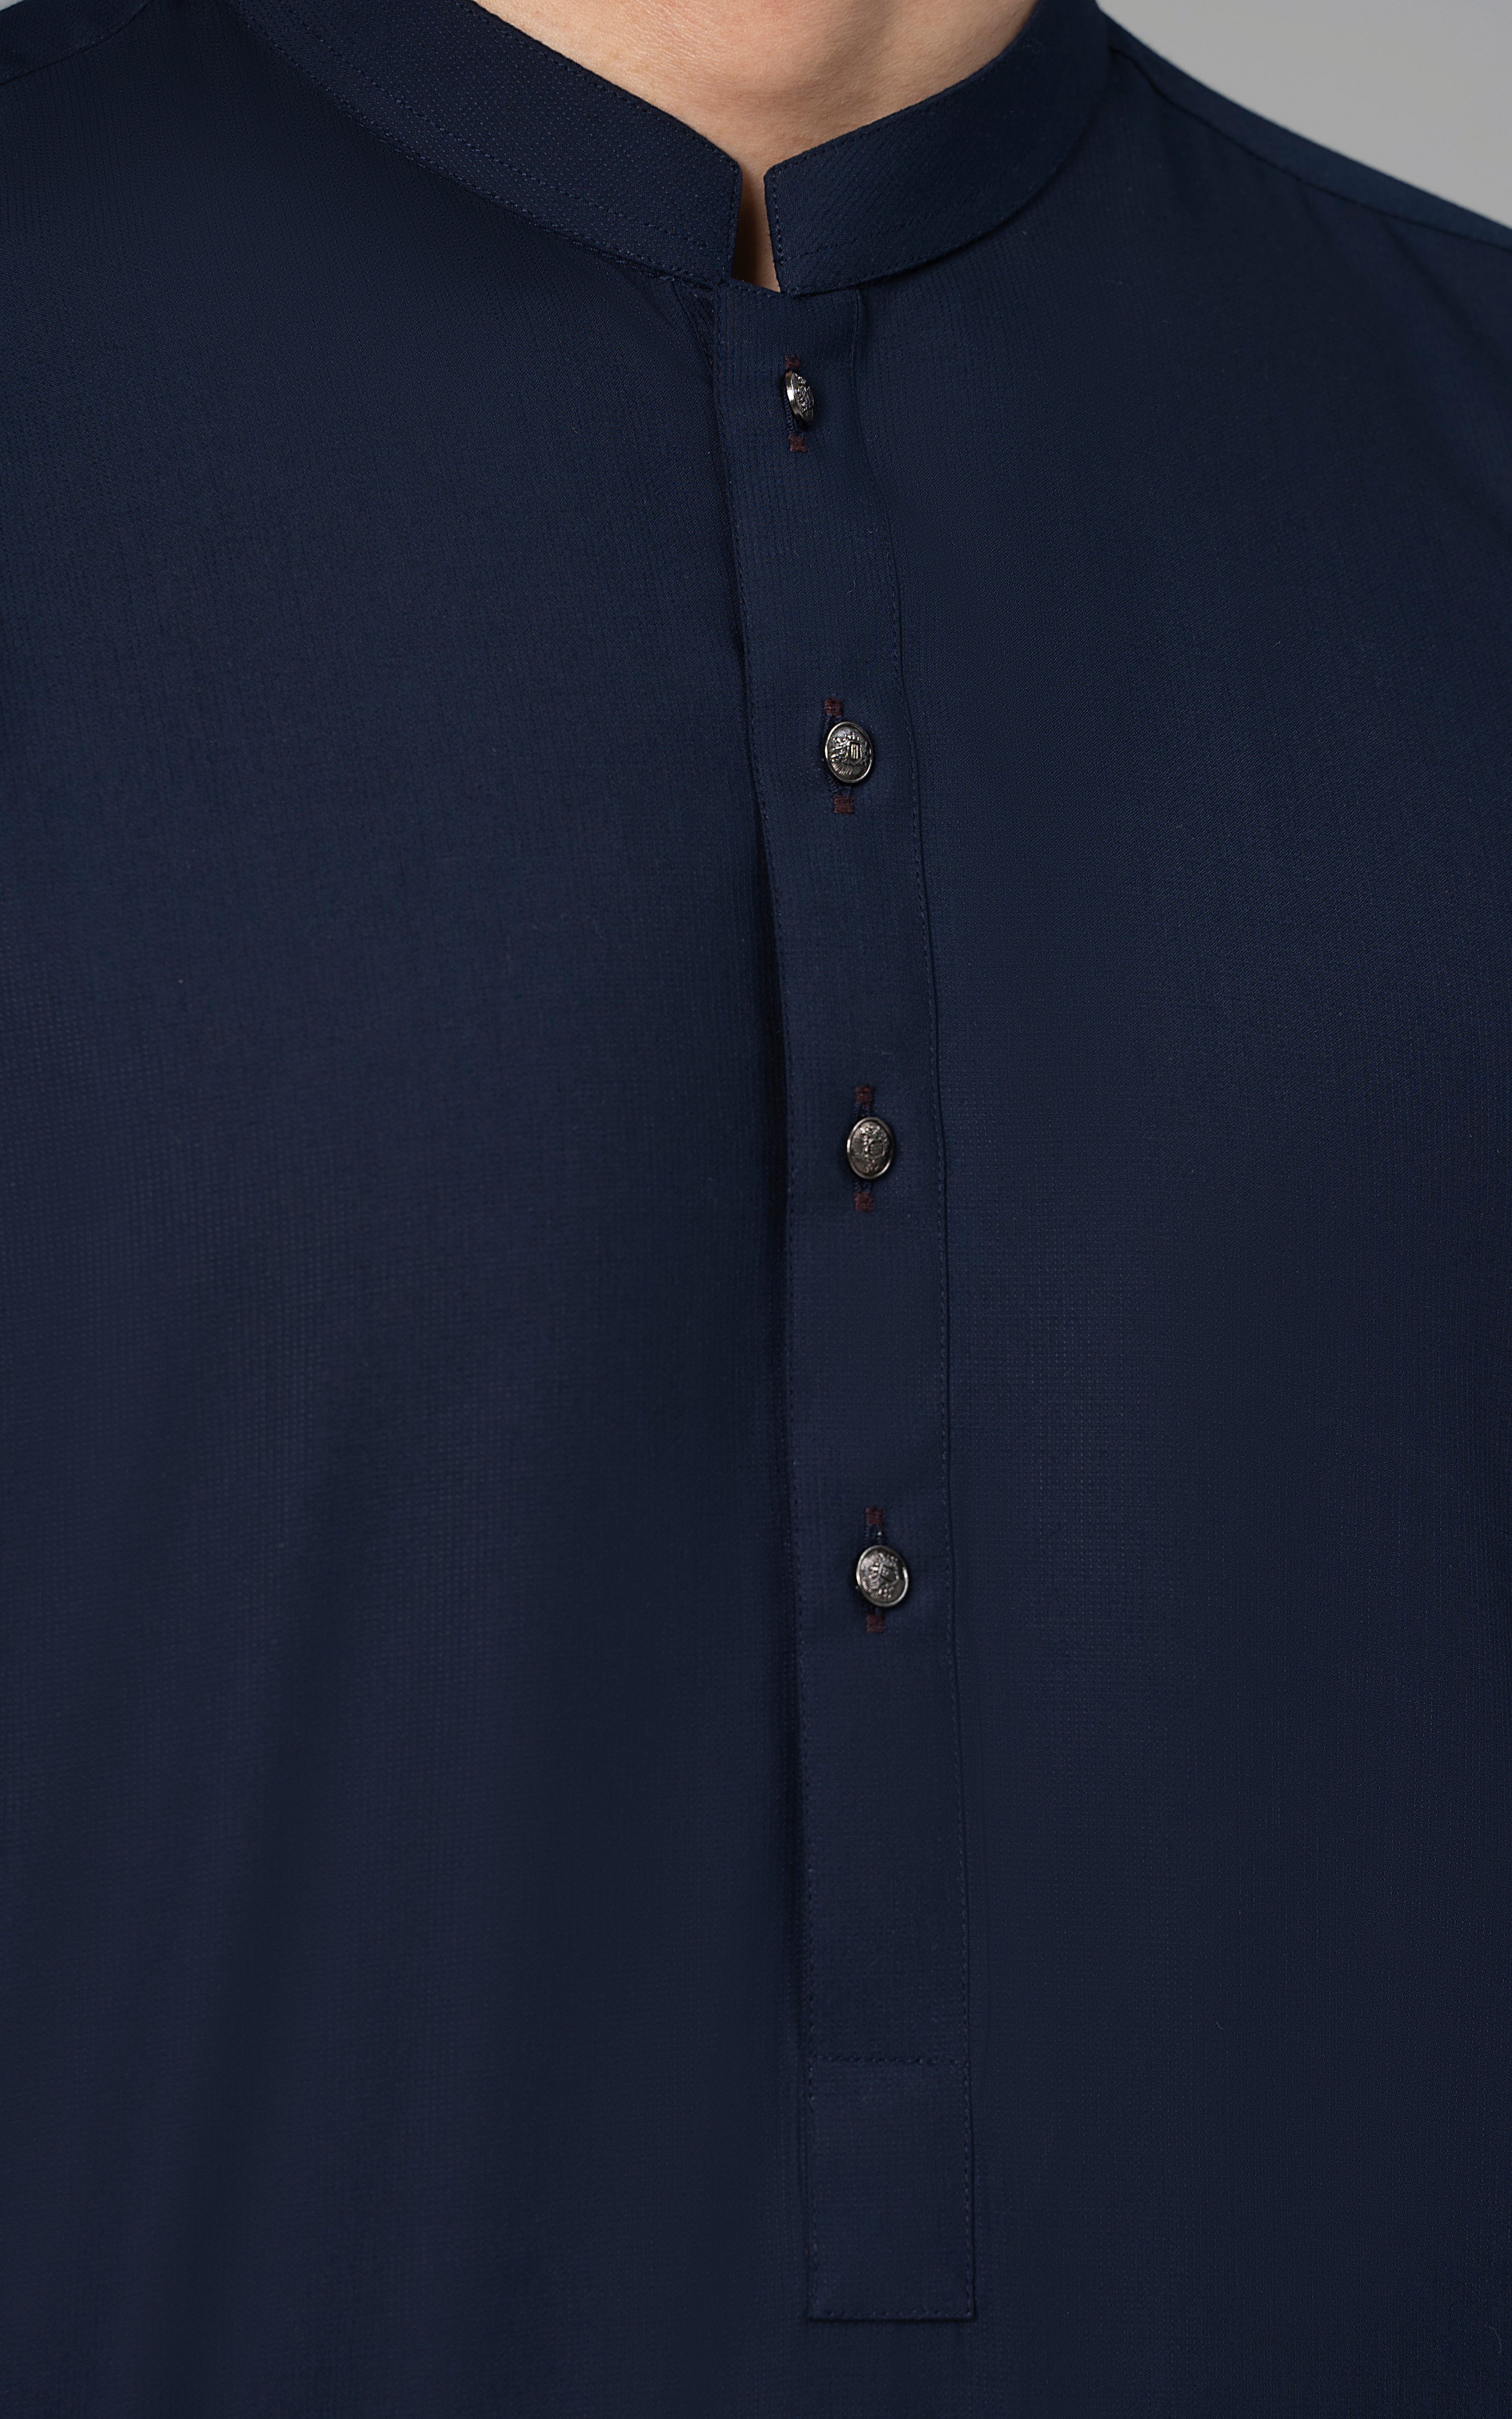 TEXTURED BLENDED WASH & WEAR - SIGNATURE COLLECTION NAVY